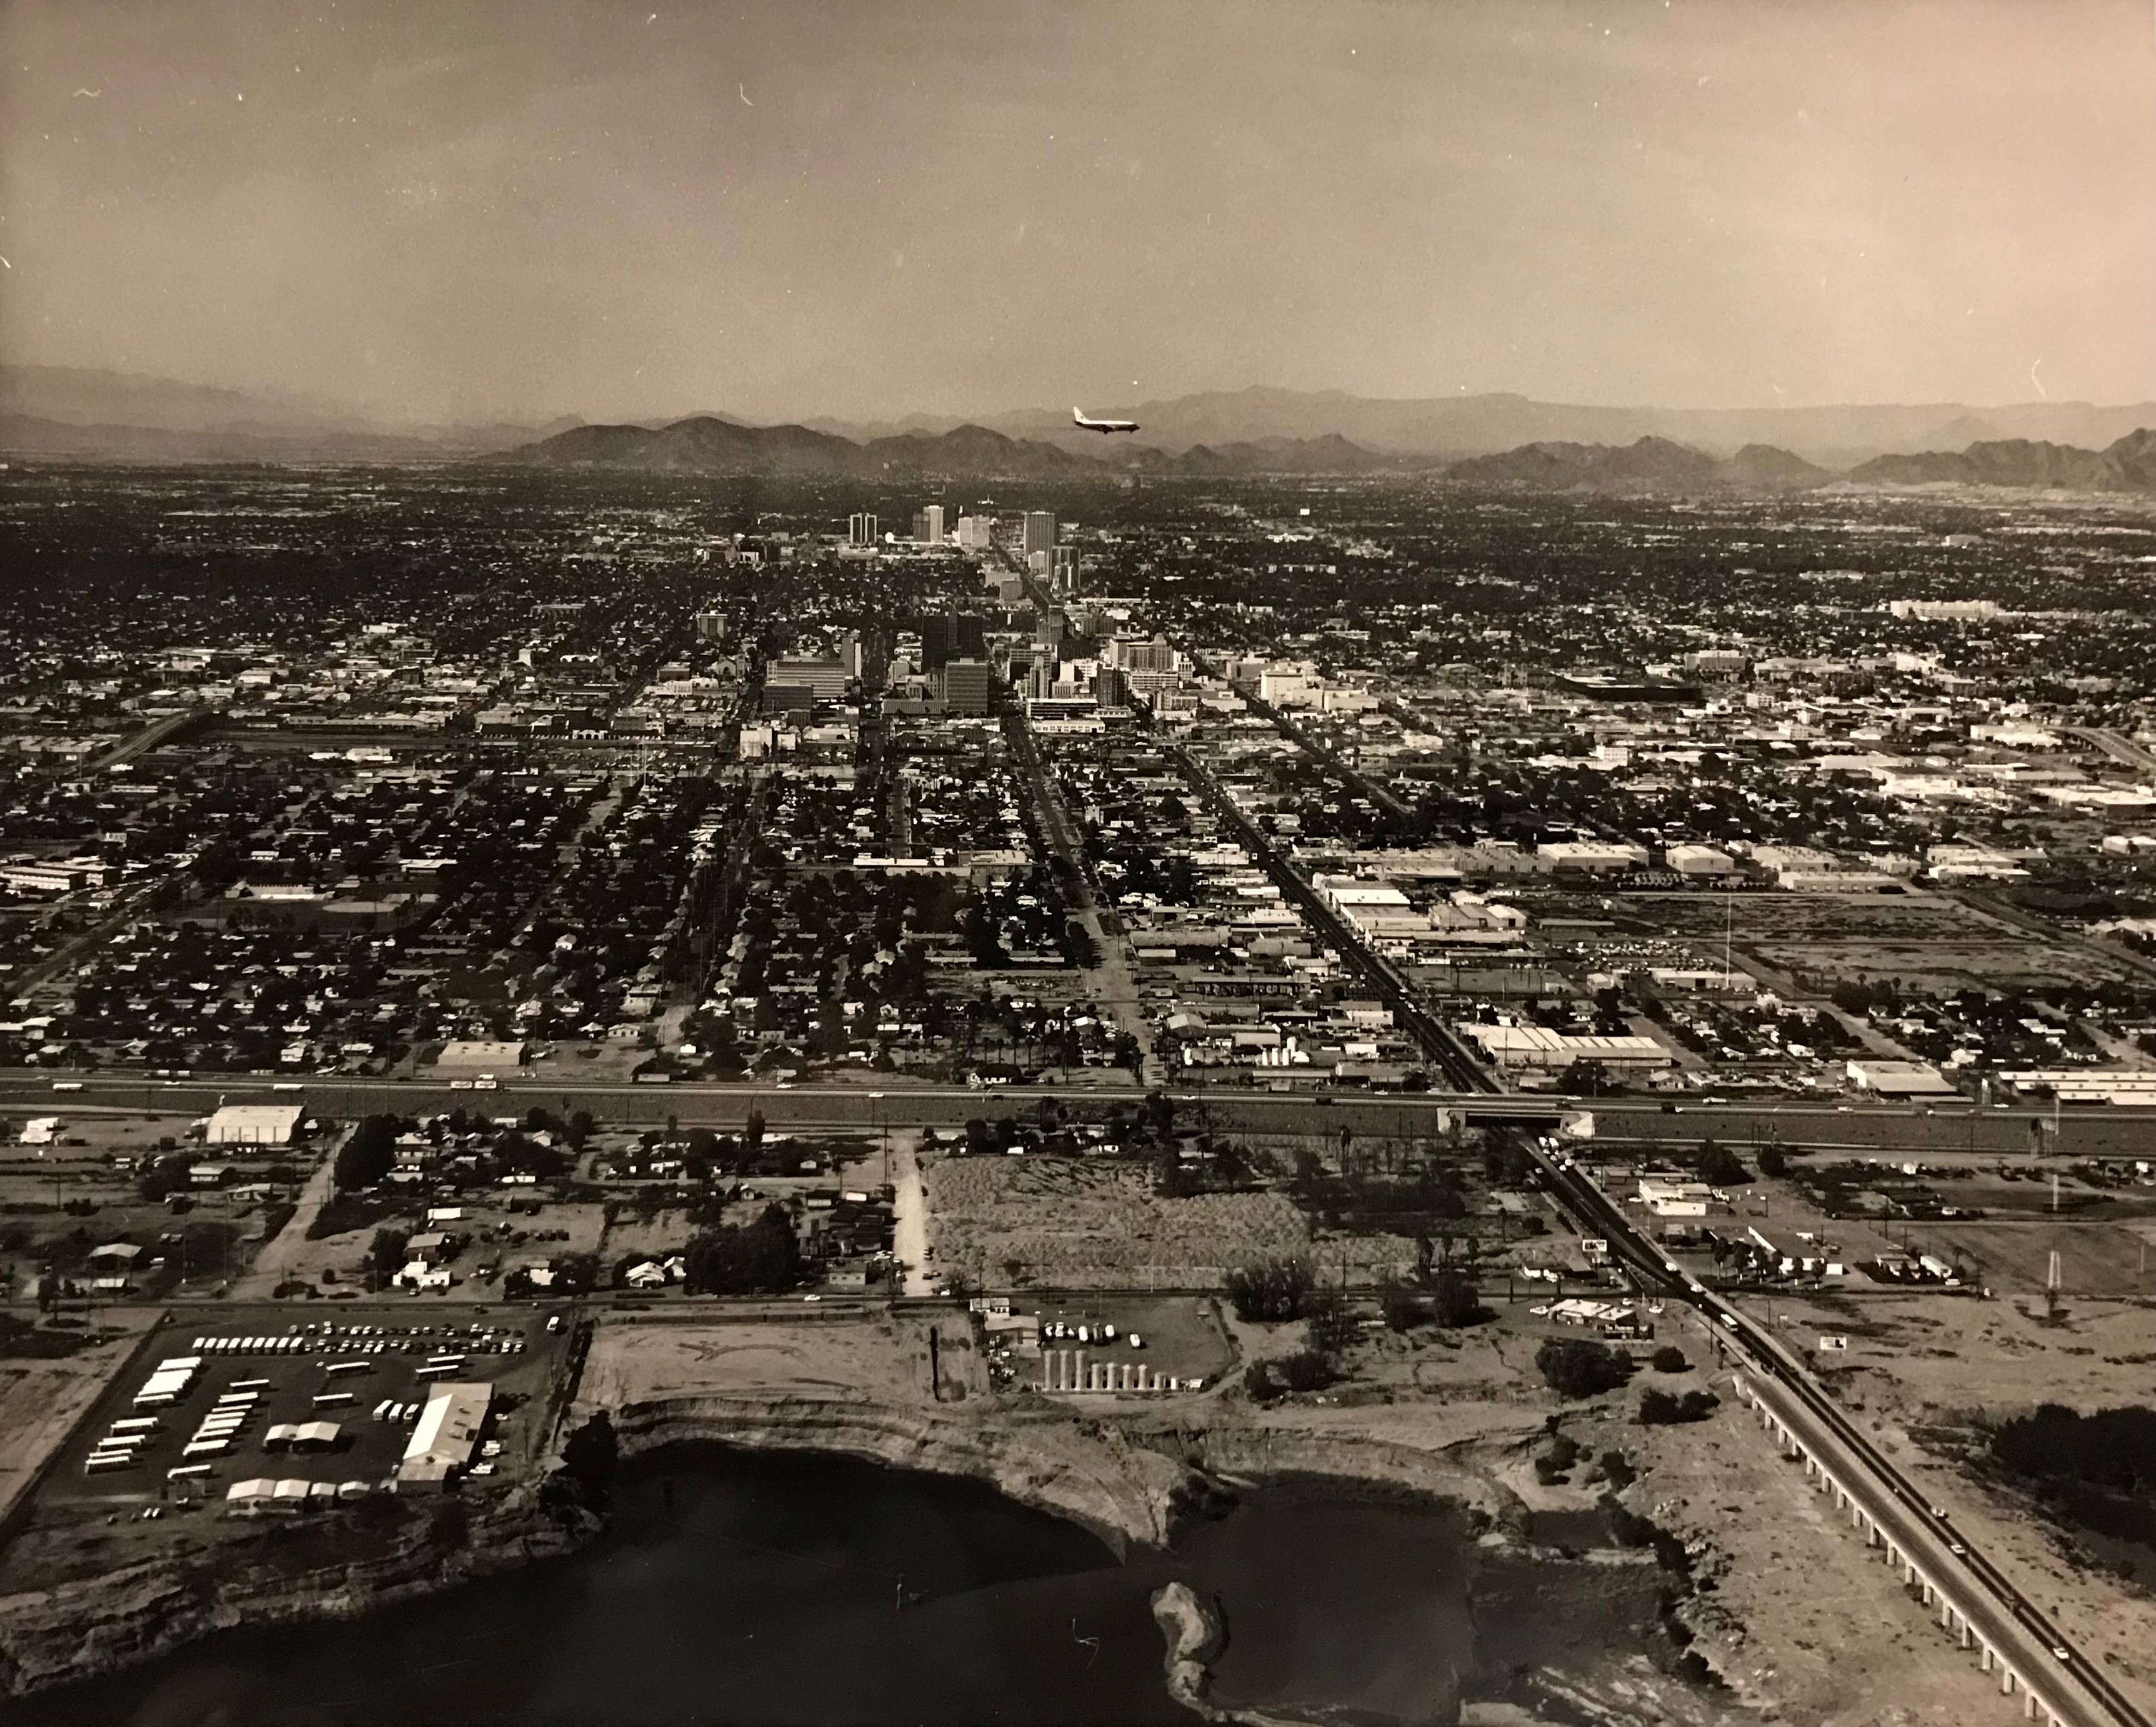 A view of I-17 from south Phoenix